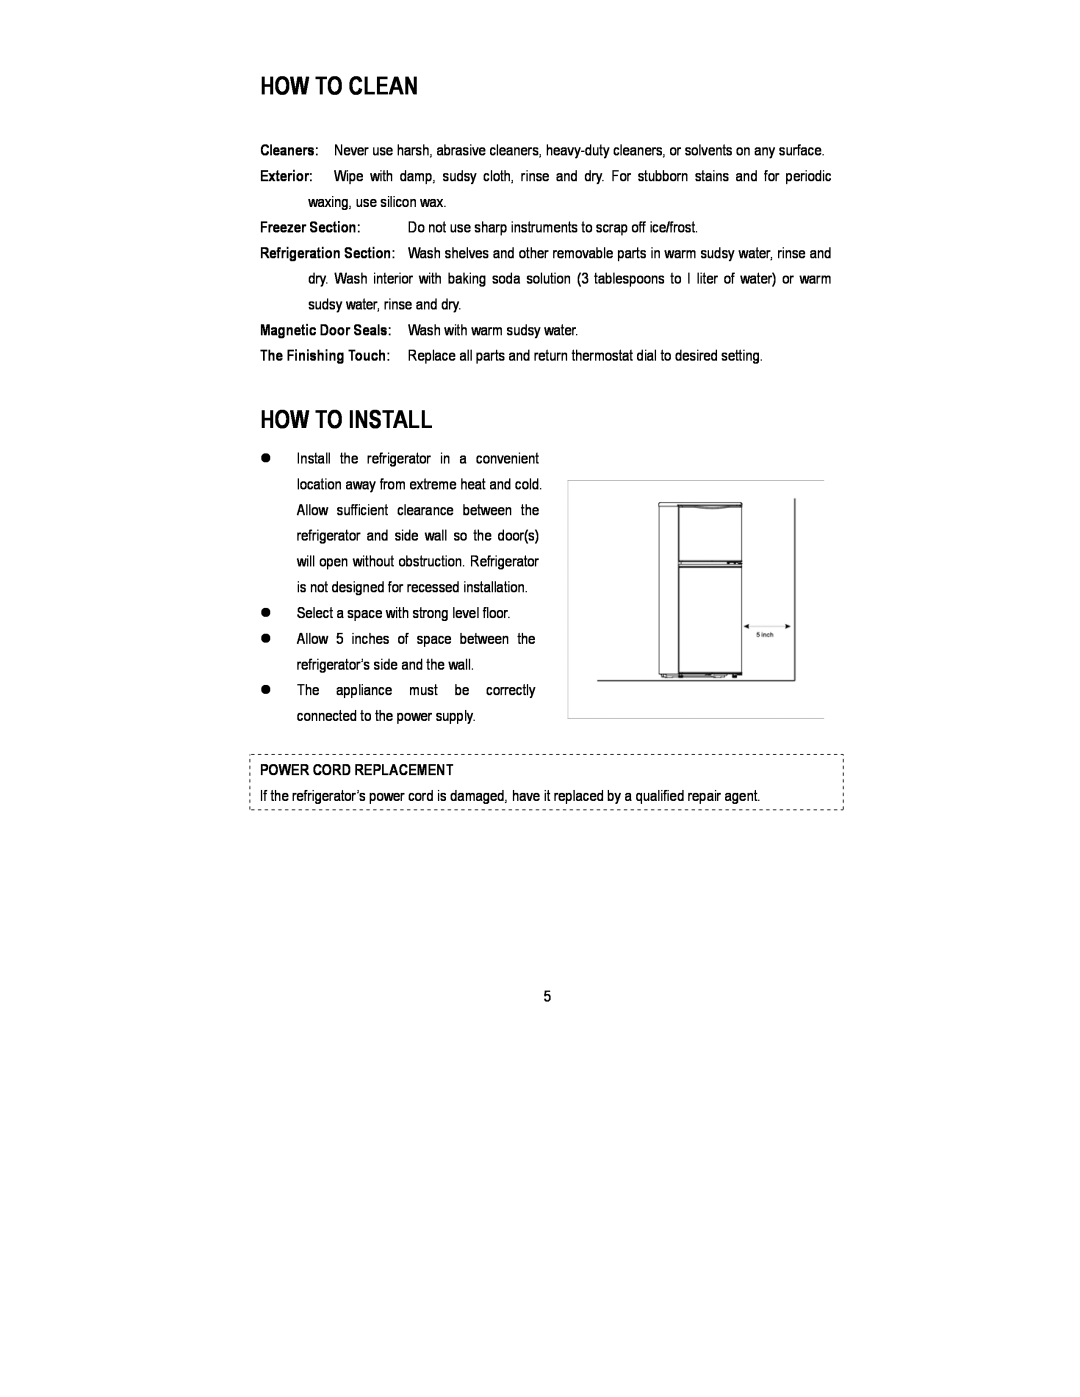 Magic Chef MCBR402S instruction manual How To Clean, How To Install, Power Cord Replacement 